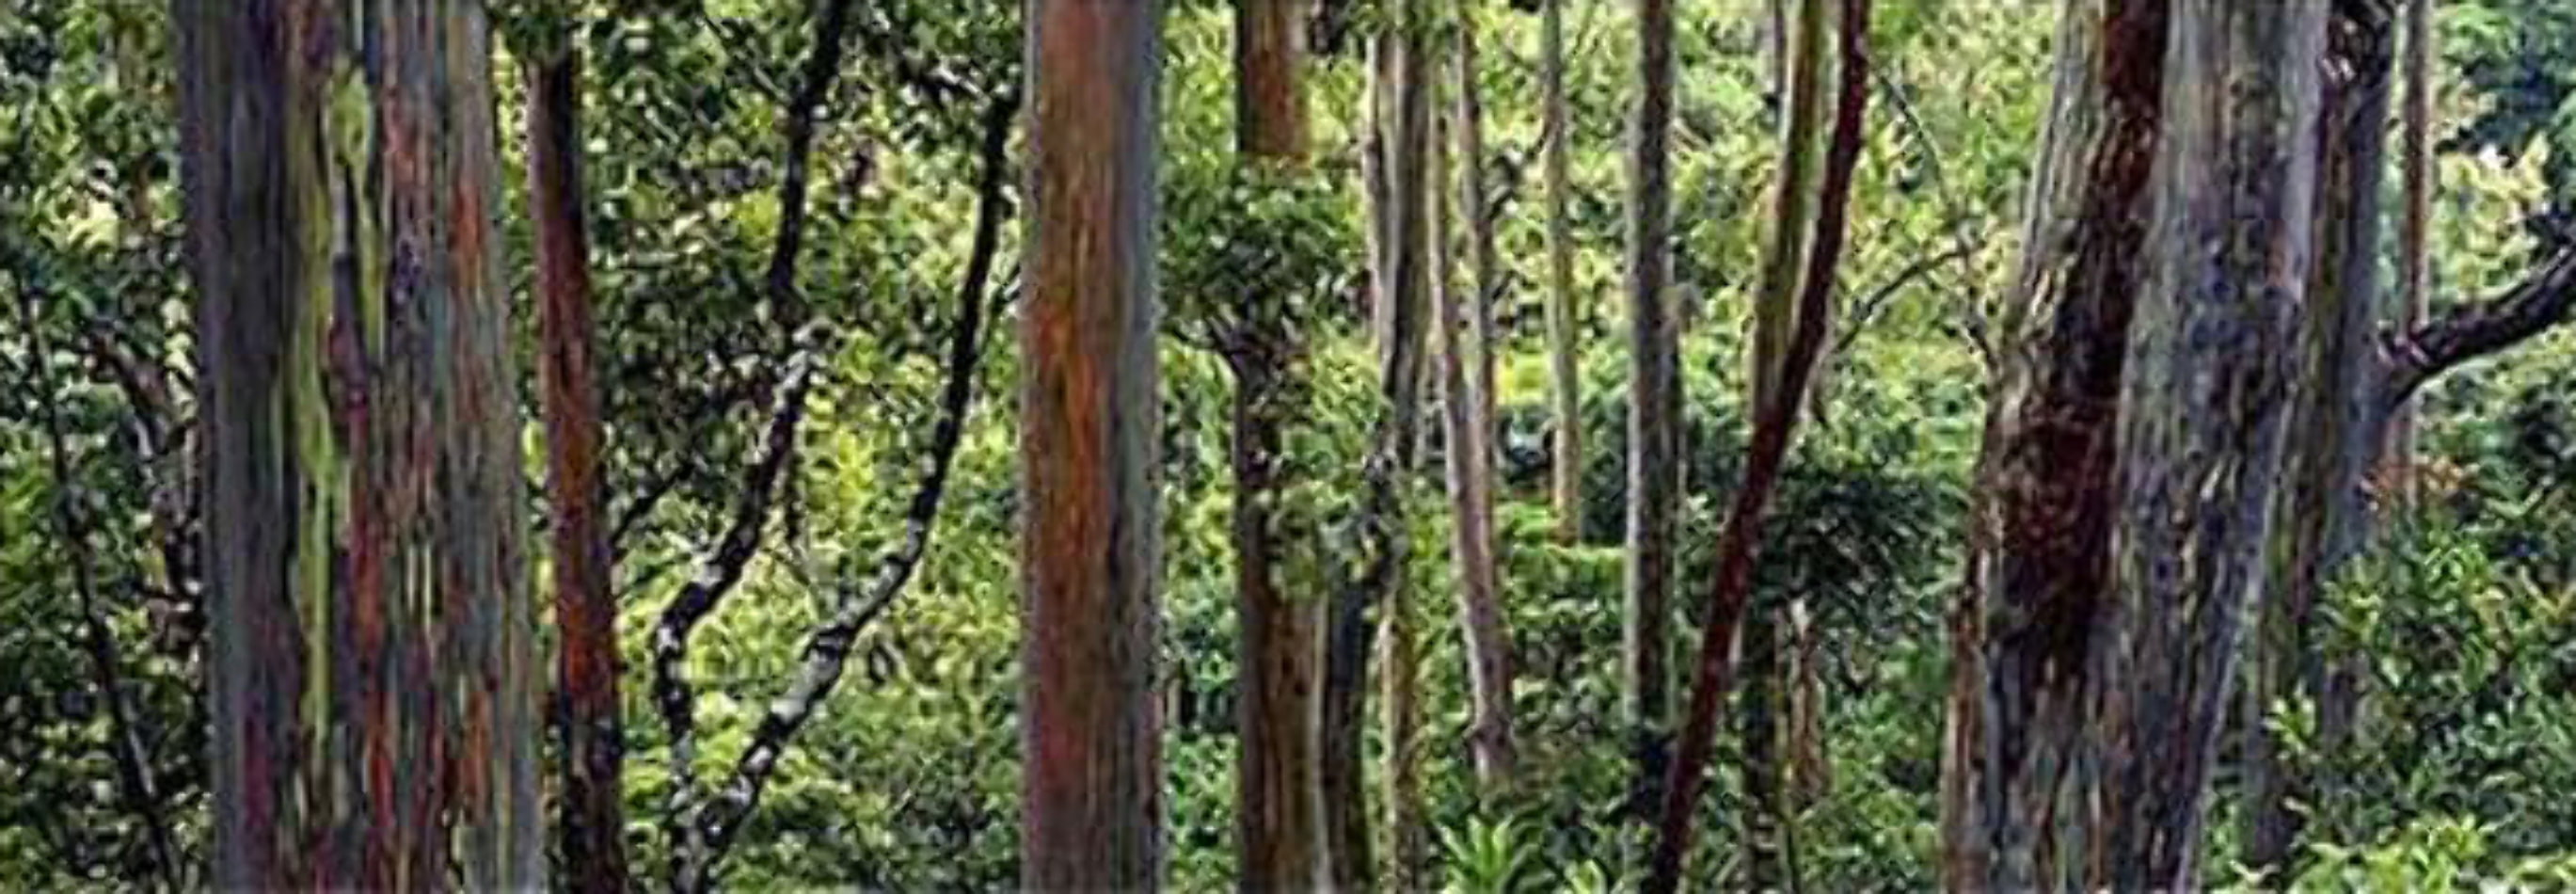 Painted Forest Panorama by Peter Lik